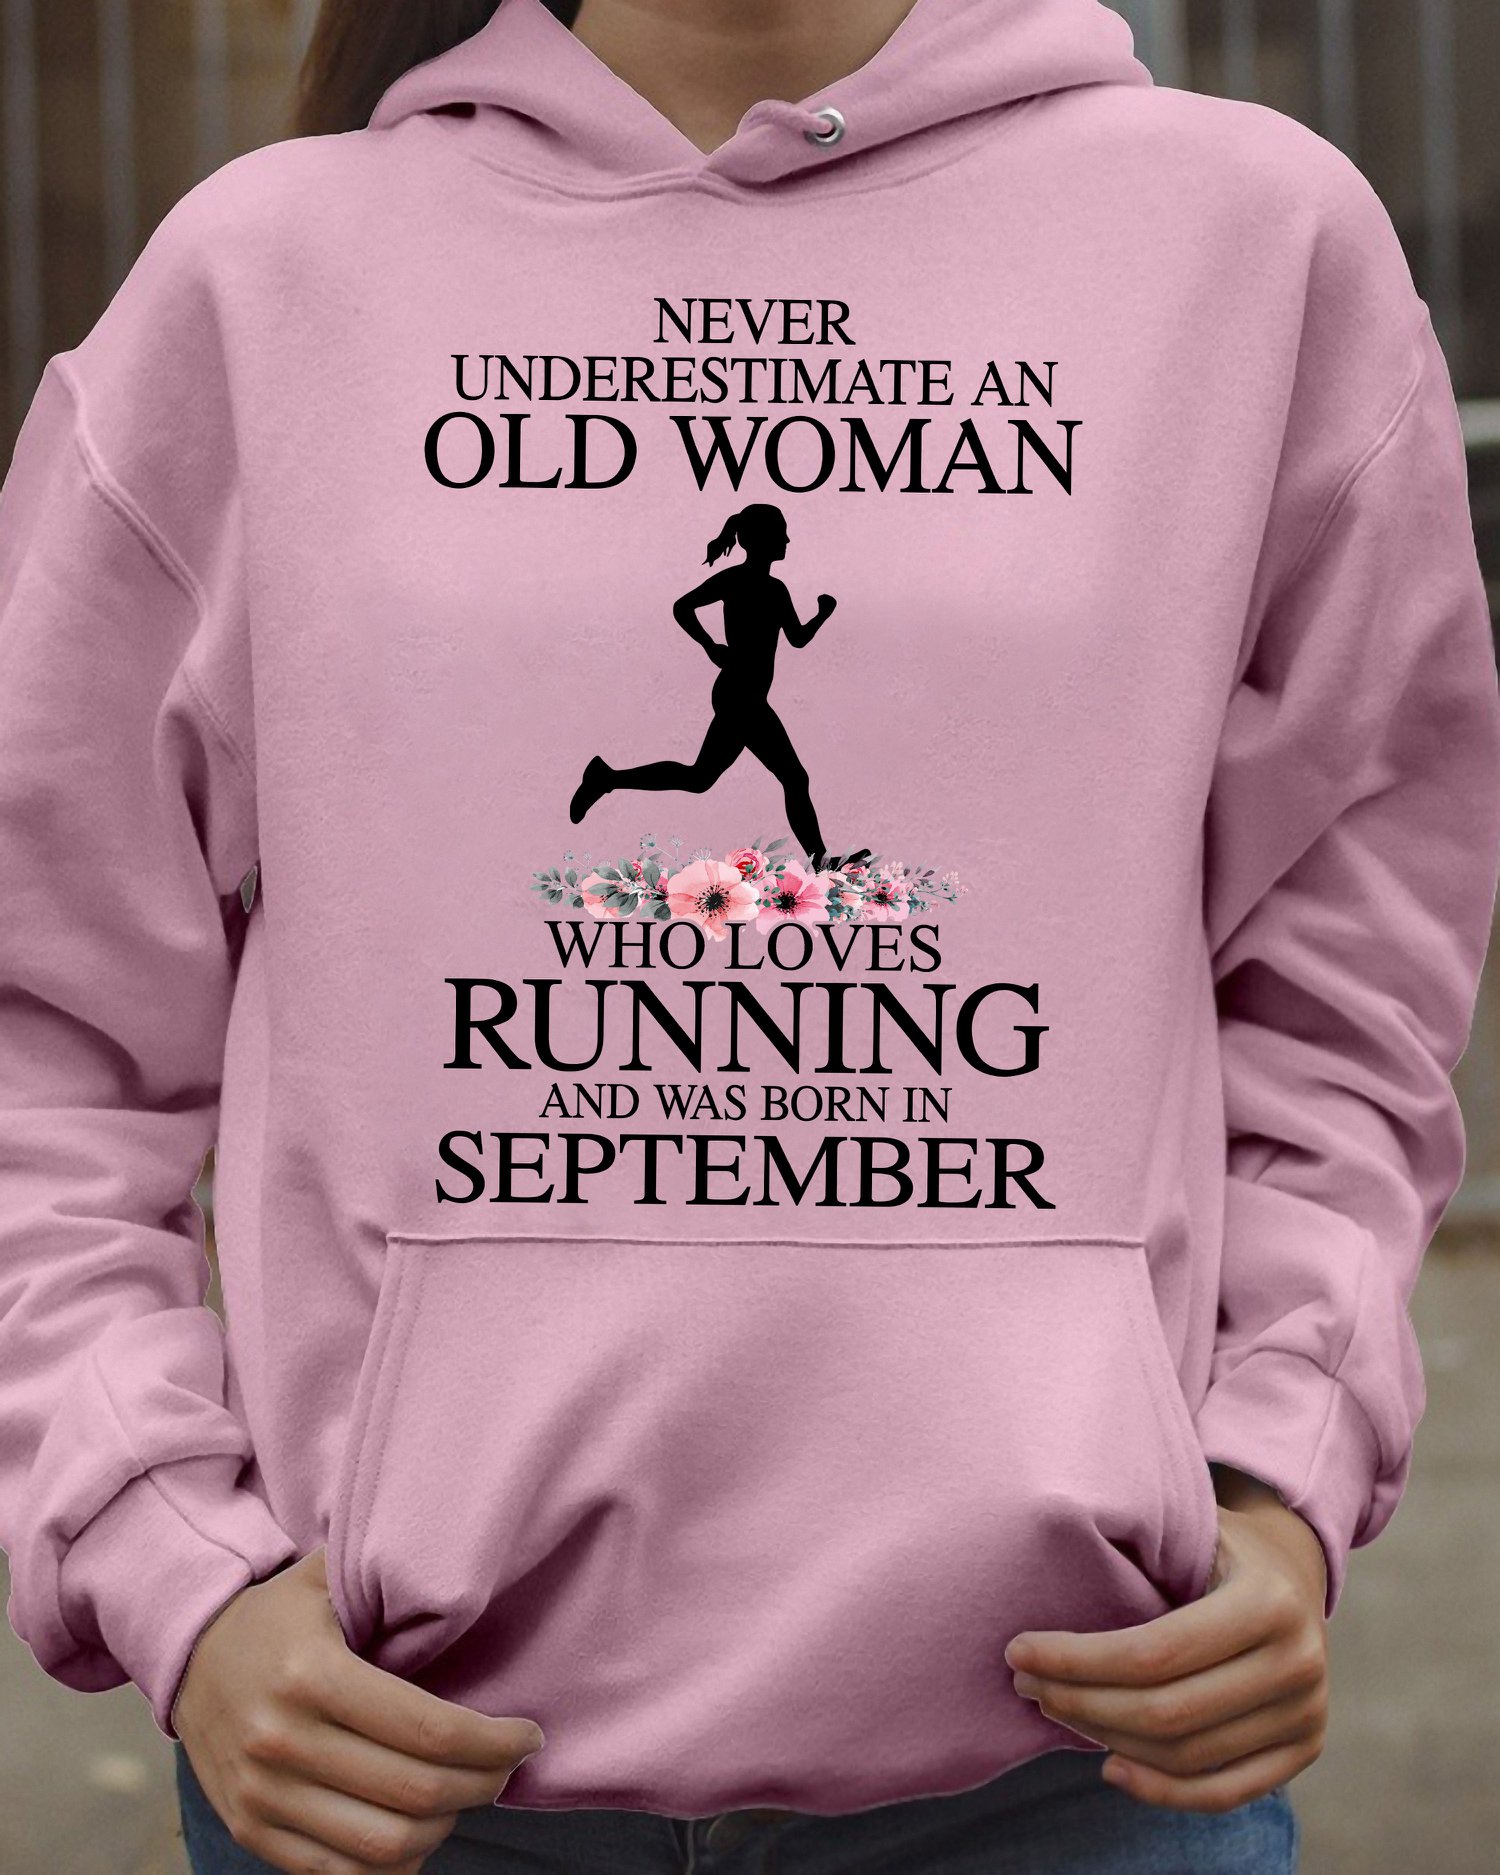 Never underestimate an old woman who loves running and was born in September